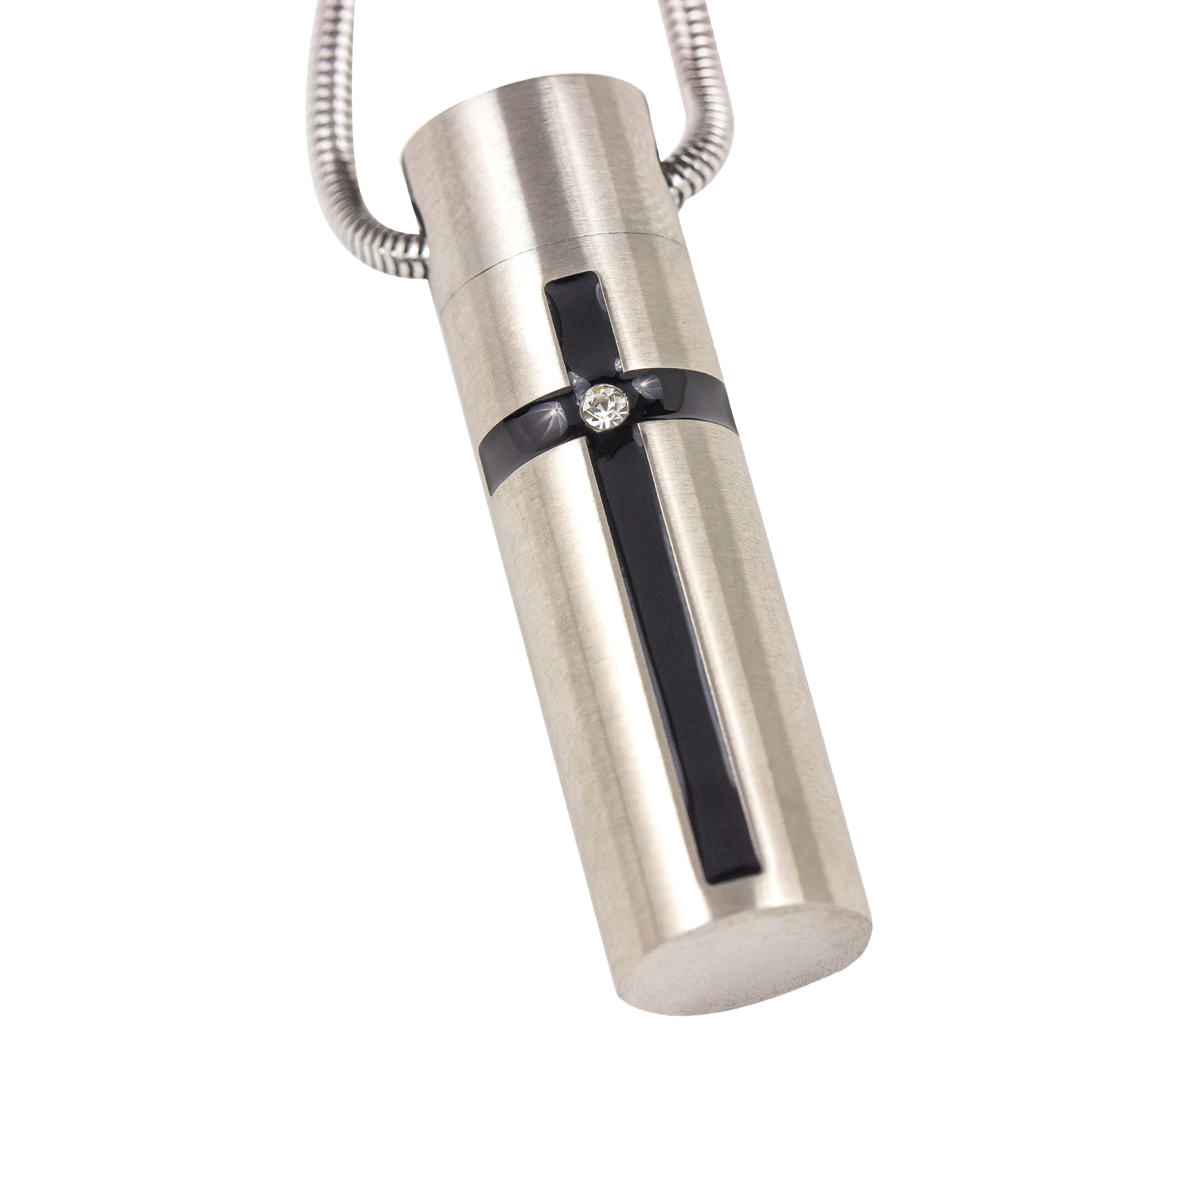 Cylinder with Cross Stainless Steel Pendant